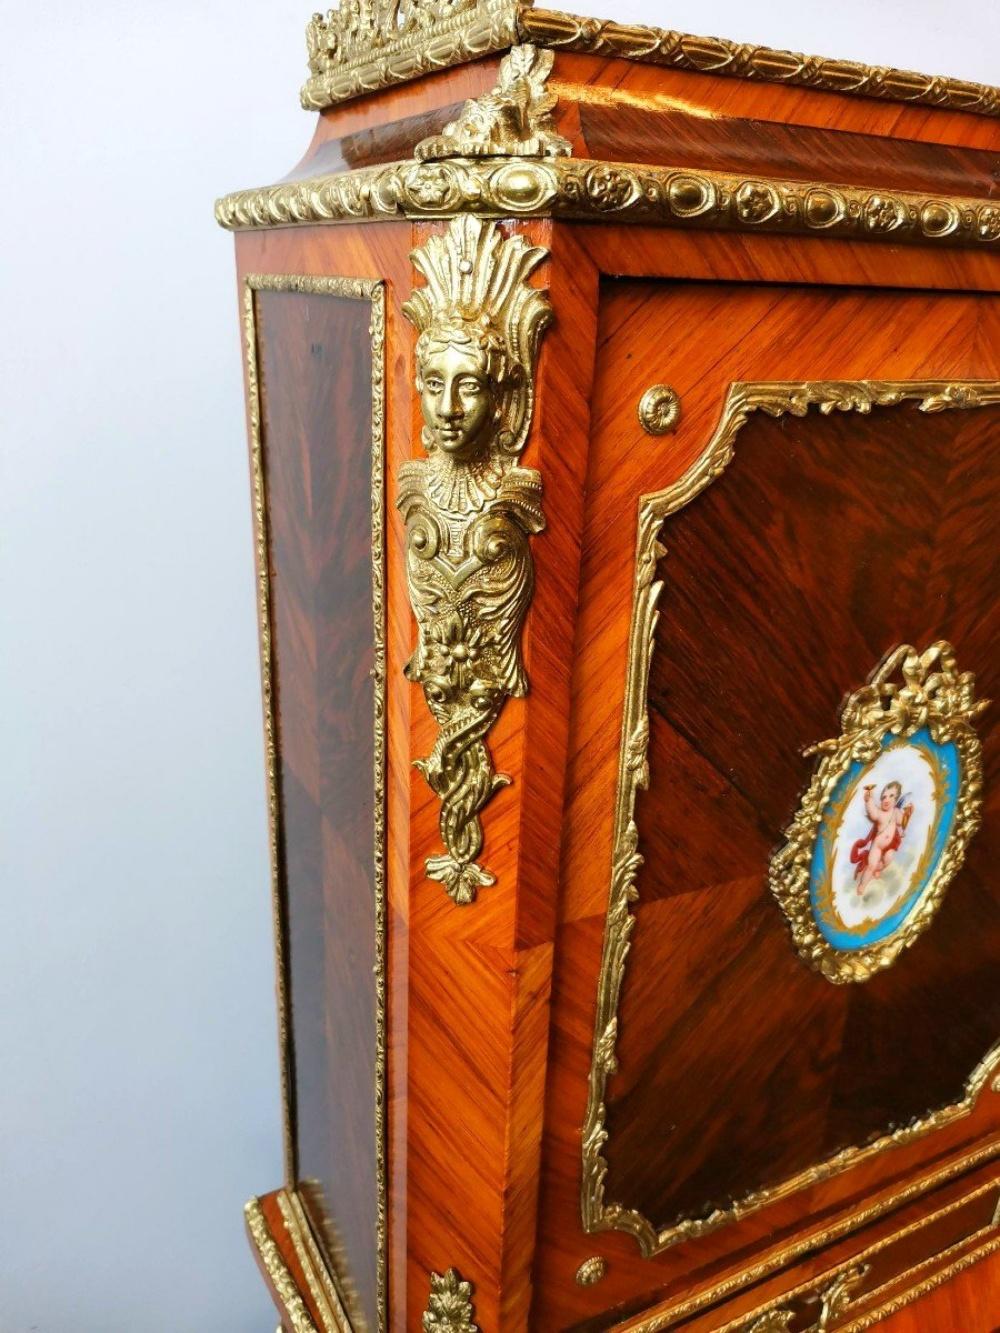 Bonheur Du Jour Desk Napoleon III Period 19th Century Wood Hand Crafted For Sale 4